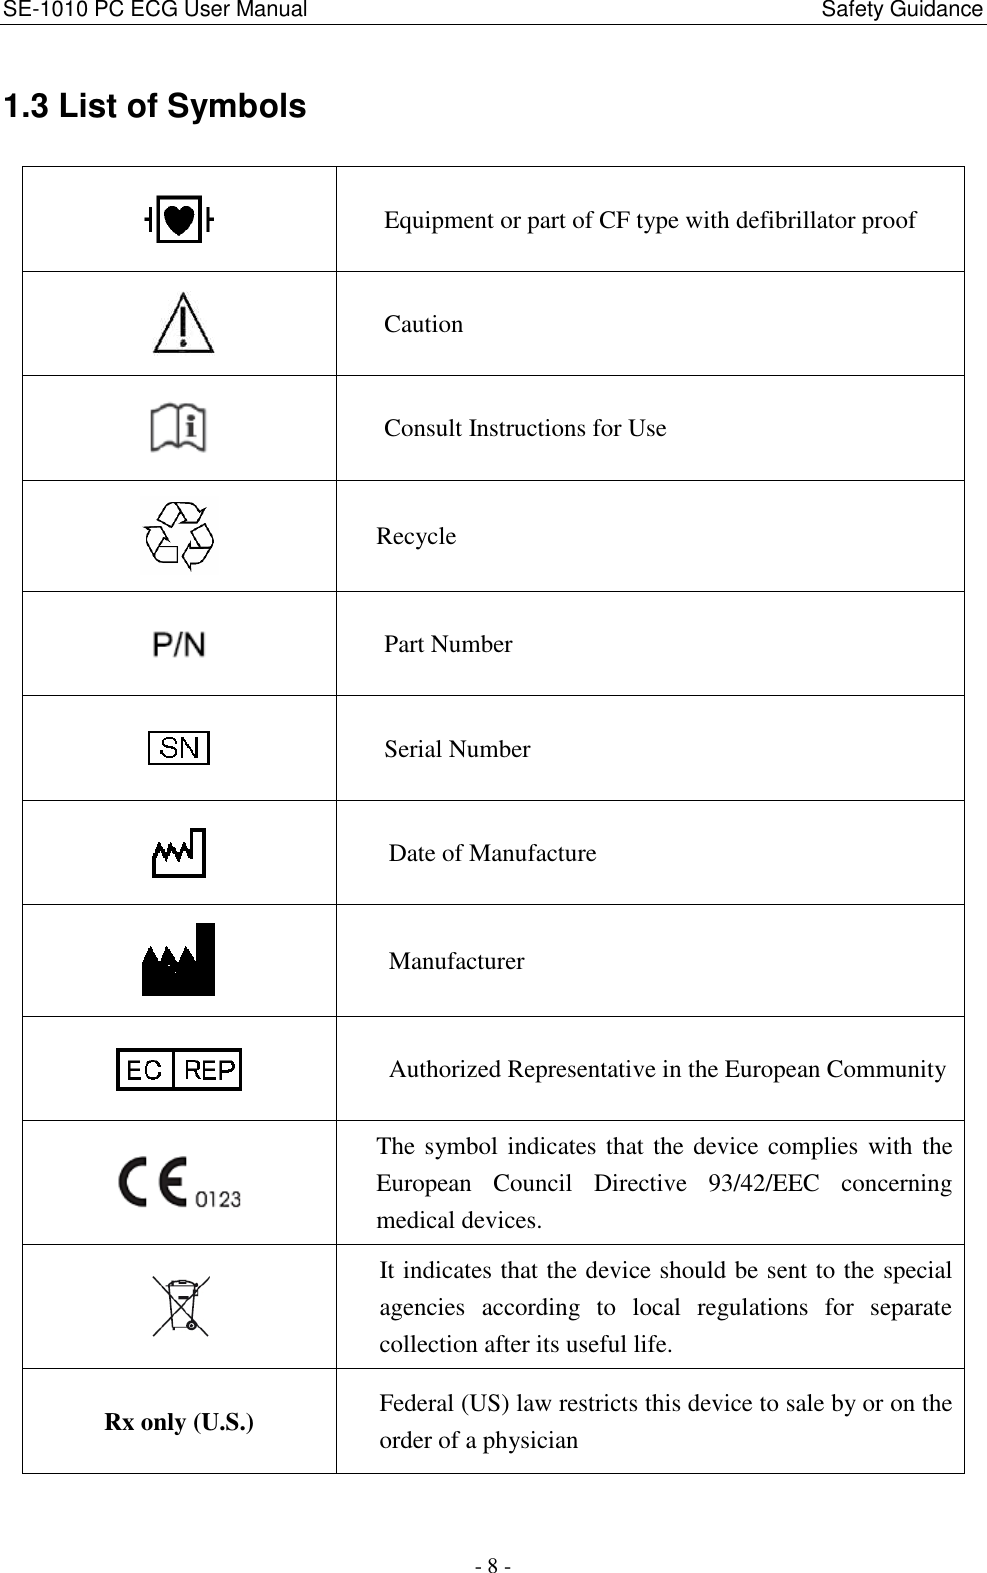 SE-1010 PC ECG User Manual                                                                                              Safety Guidance - 8 - 1.3 List of Symbols  Equipment or part of CF type with defibrillator proof  Caution  Consult Instructions for Use  Recycle  Part Number  Serial Number  Date of Manufacture  Manufacturer  Authorized Representative in the European Community  The symbol indicates that the device complies with the European  Council  Directive  93/42/EEC  concerning medical devices.  It indicates that the device should be sent to the special agencies  according  to  local  regulations  for  separate collection after its useful life. Rx only (U.S.) Federal (US) law restricts this device to sale by or on the order of a physician 